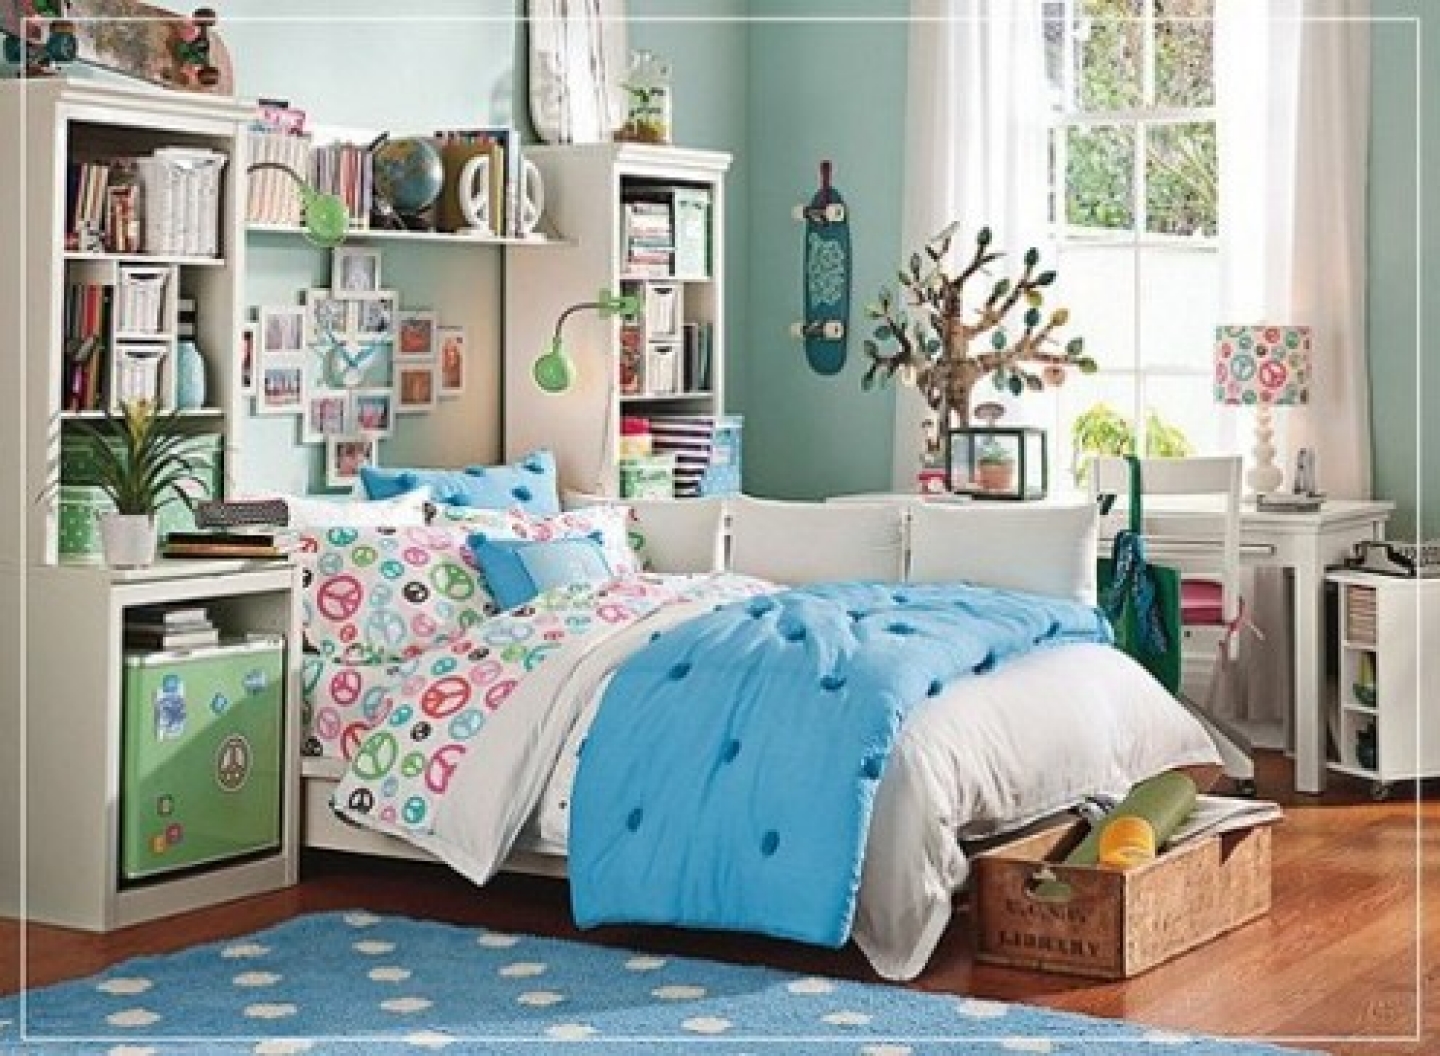 Tree Branch With Attractive Tree Branch Display Mixed With Cozy Murphy Bed In Messy Teen Room Decorating Ideas Bedroom Teen Bedroom Decoration With Awesome Look